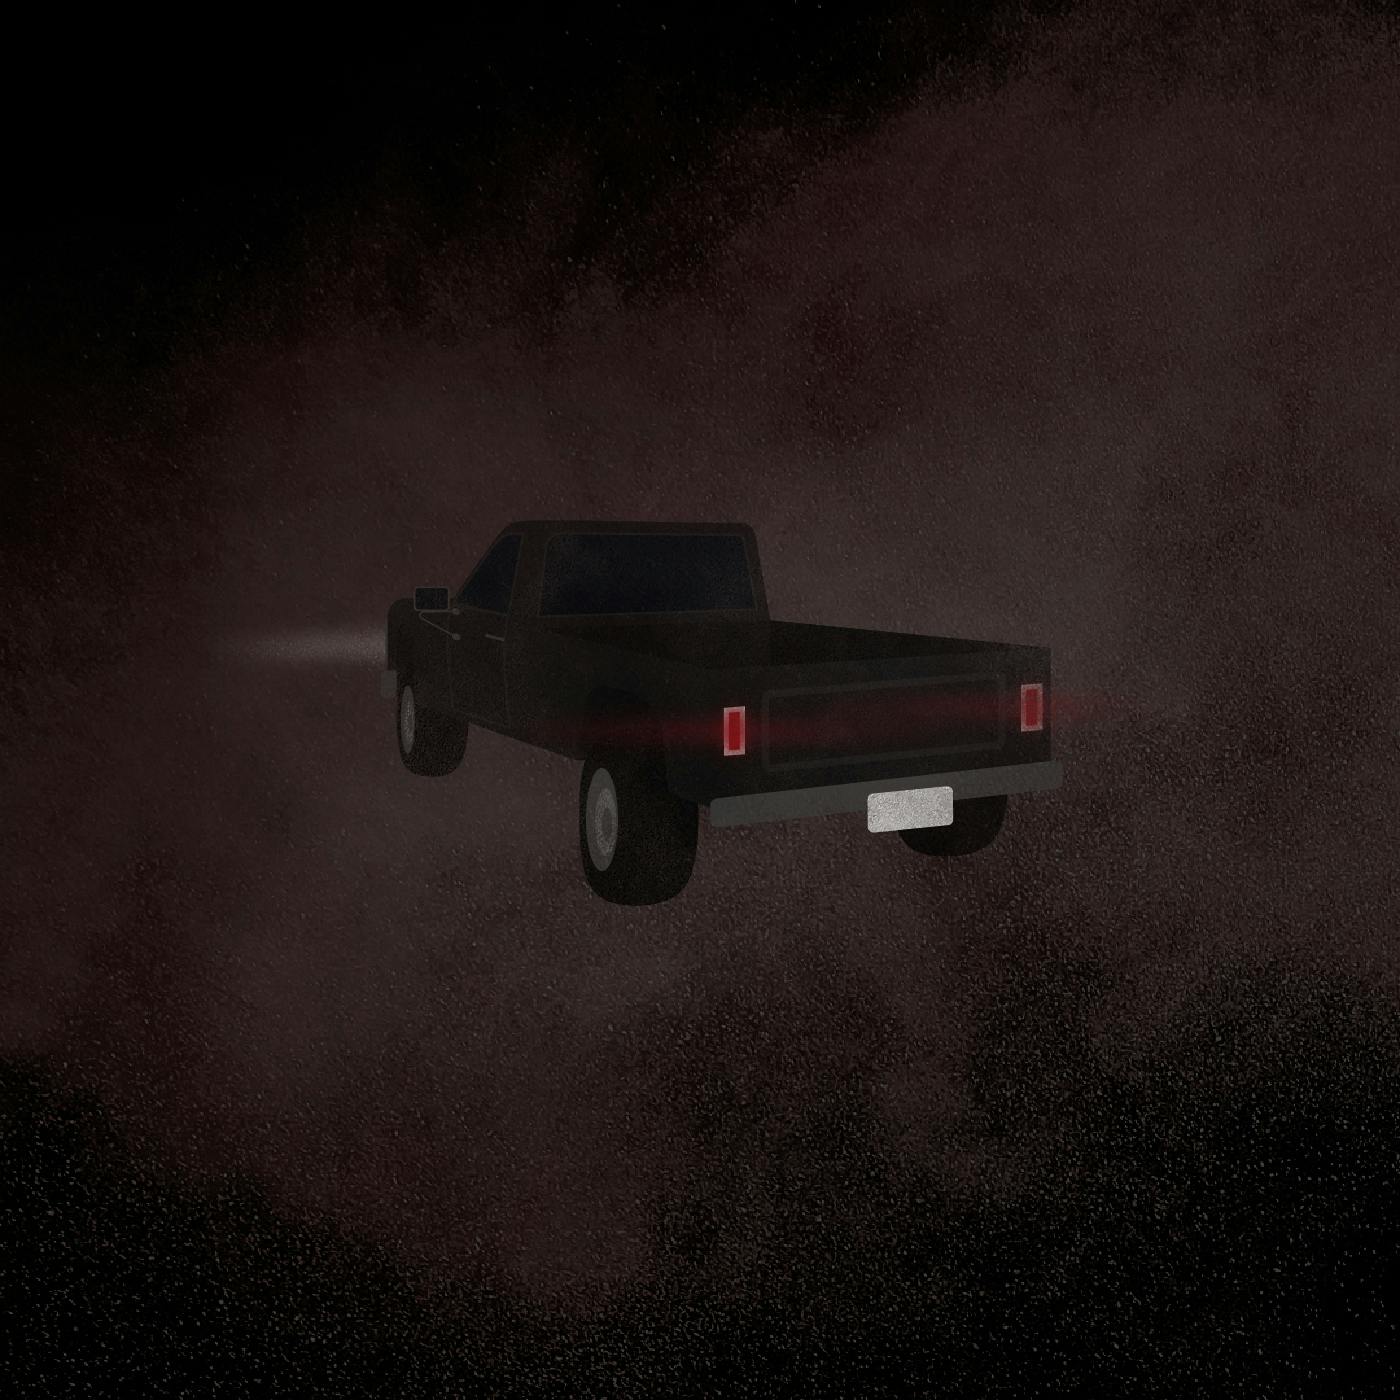 S1E5: The Black Truck by Tenderfoot TV